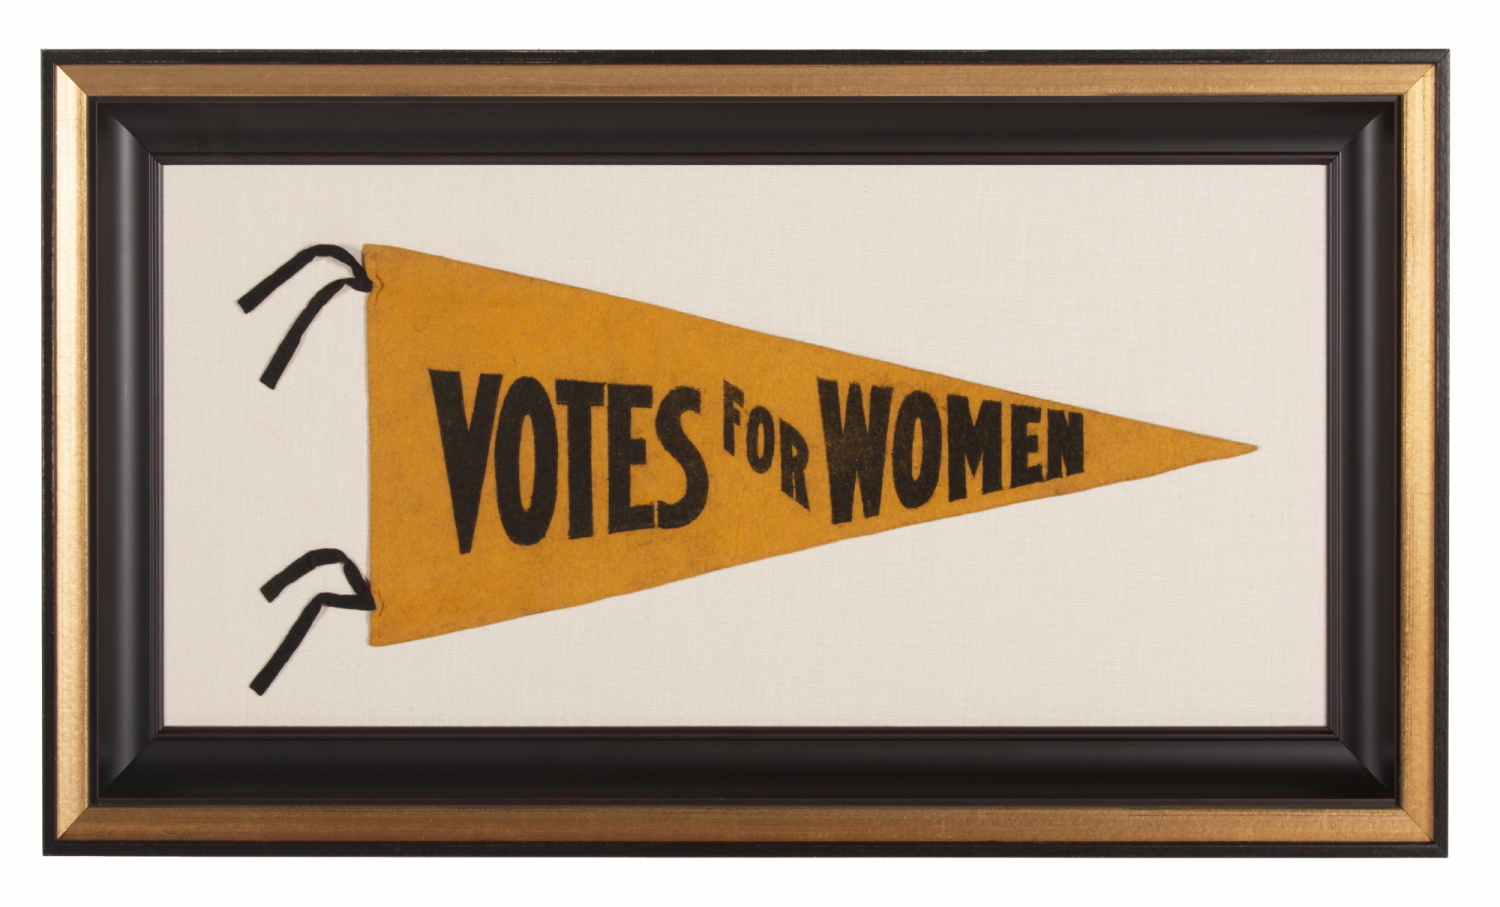 AMERICAN SUFFRAGE MOVEMENT PENNANT WITH "VOTES FOR WOMEN" TEXT, BOLD COLOR, AND IN AN EXCEPTIONAL STATE OF PRESERVATION; circa 1912-1919